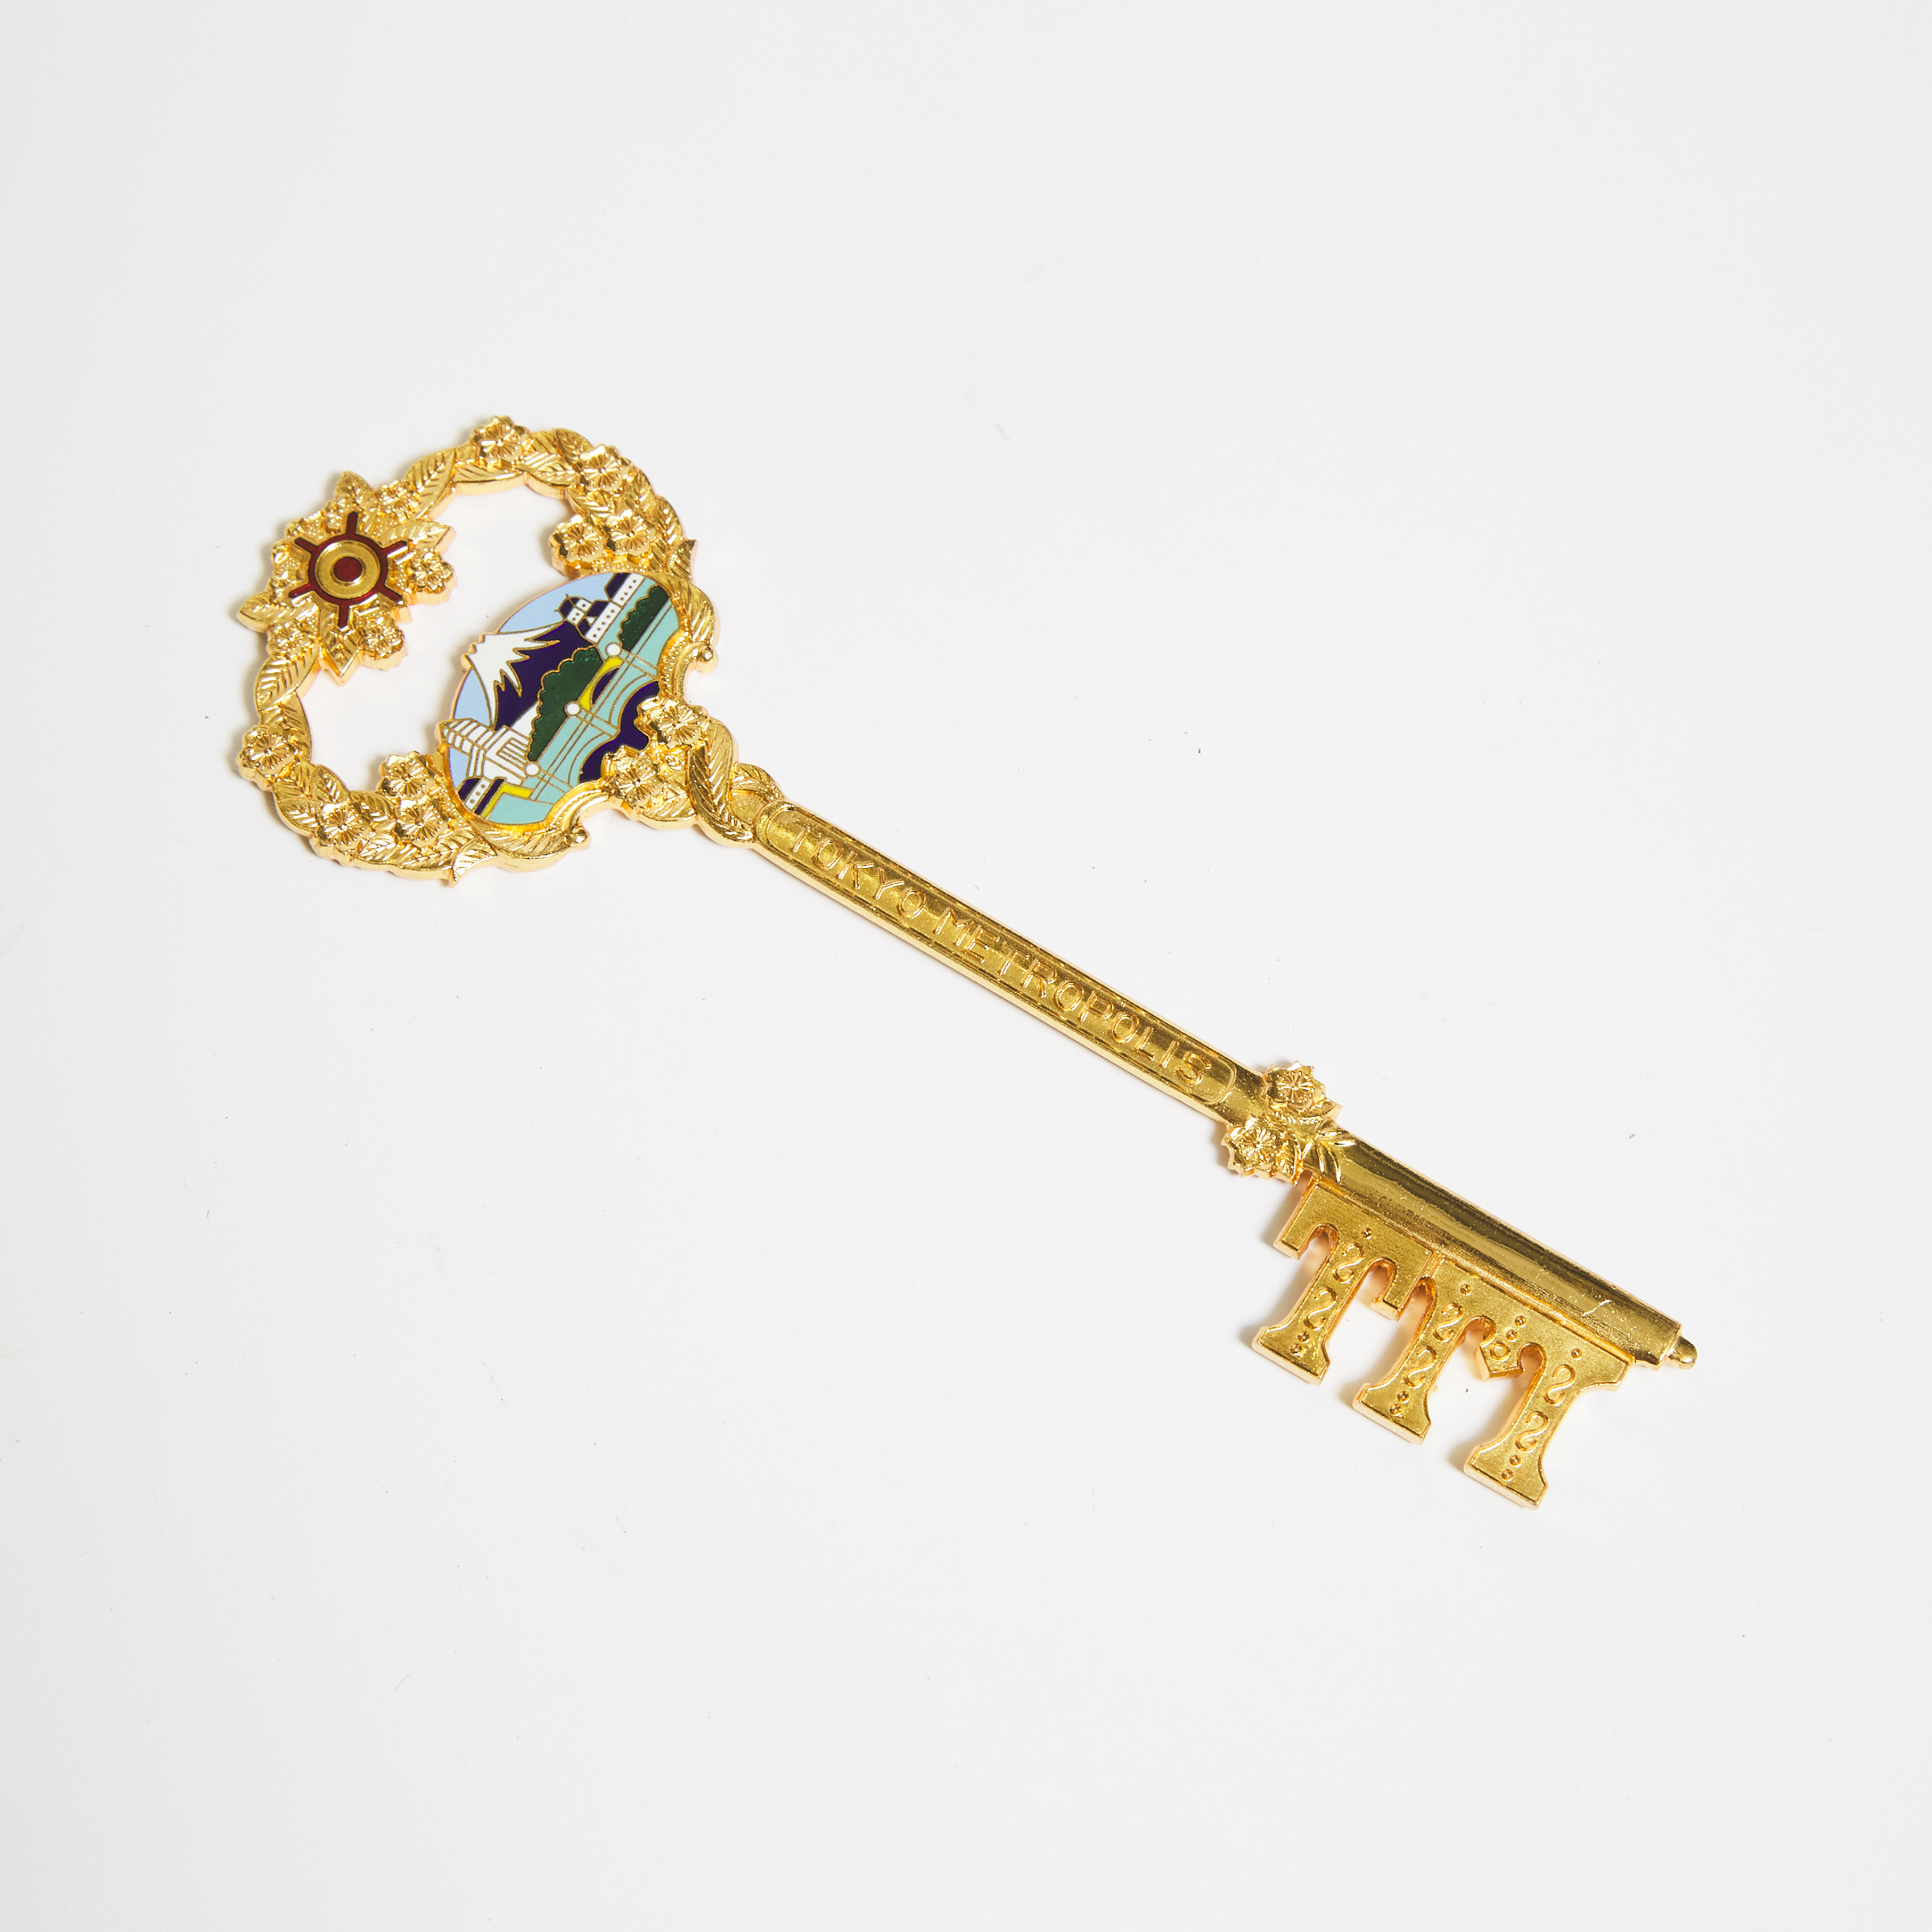 Ceremonial Presentation Key to the City of Tokyo, Japan, mid 20th century